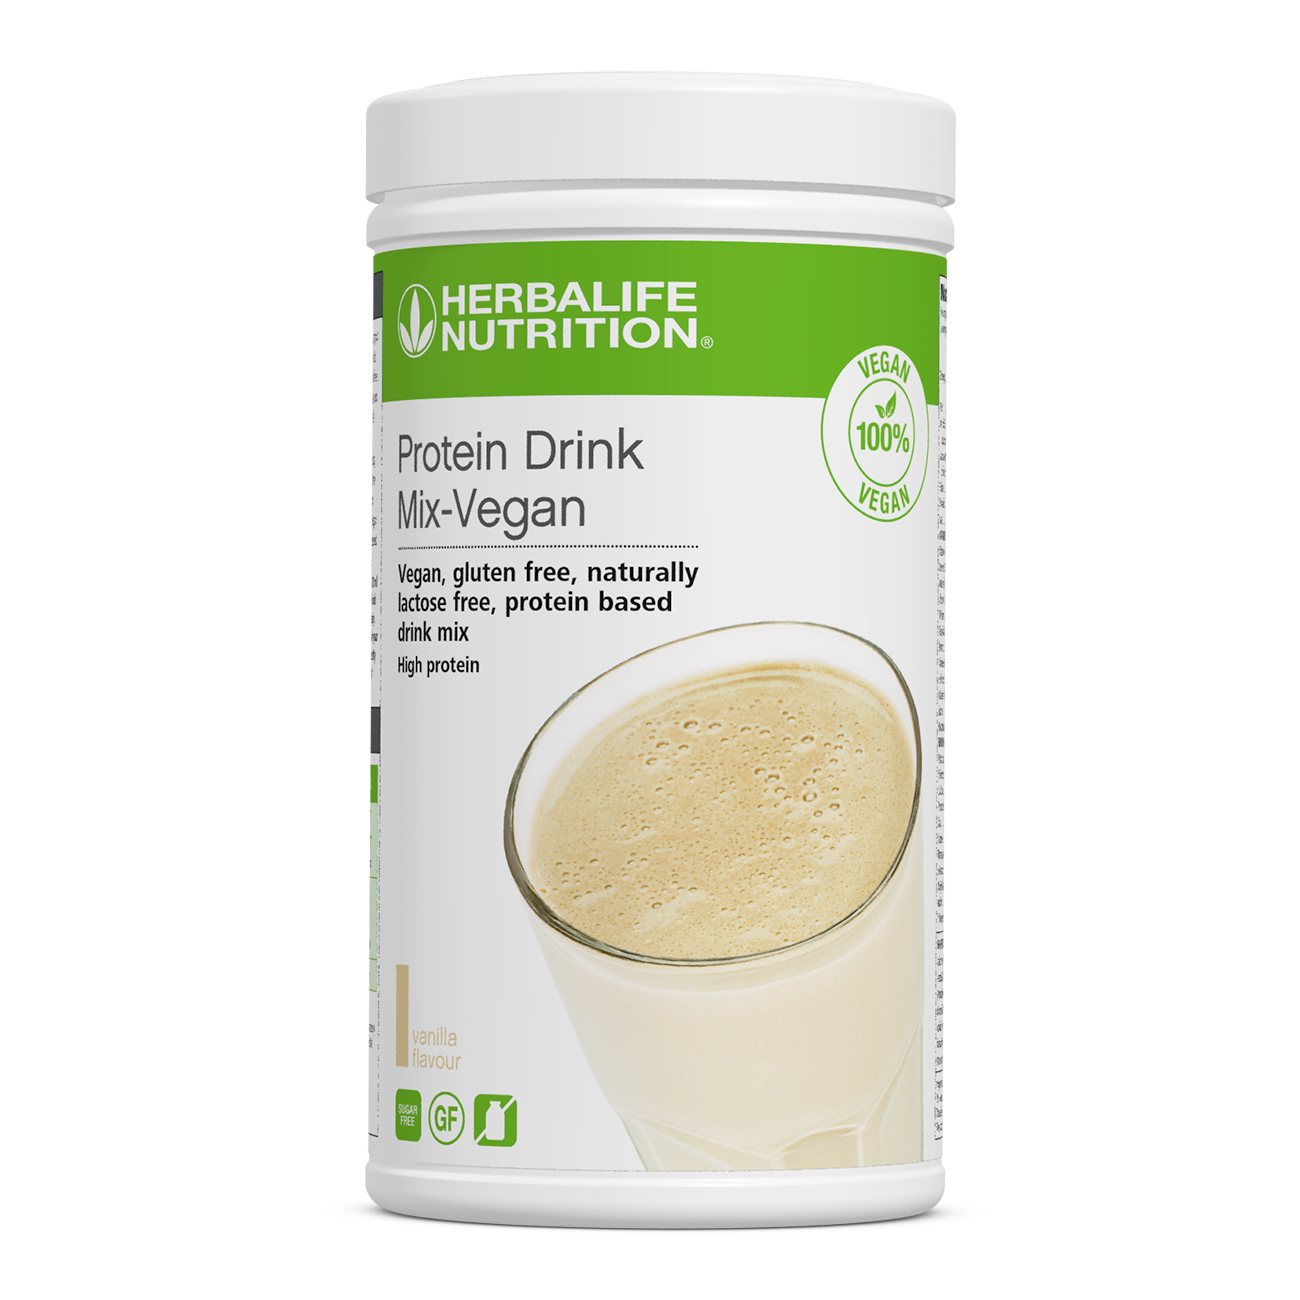 Protein Drink Mix-Vegan is an ideal way to boost your protein intake throughout the day. Combine with your favourite Formula 1 shake for a healthy meal that's high in protein and low in sugar.  